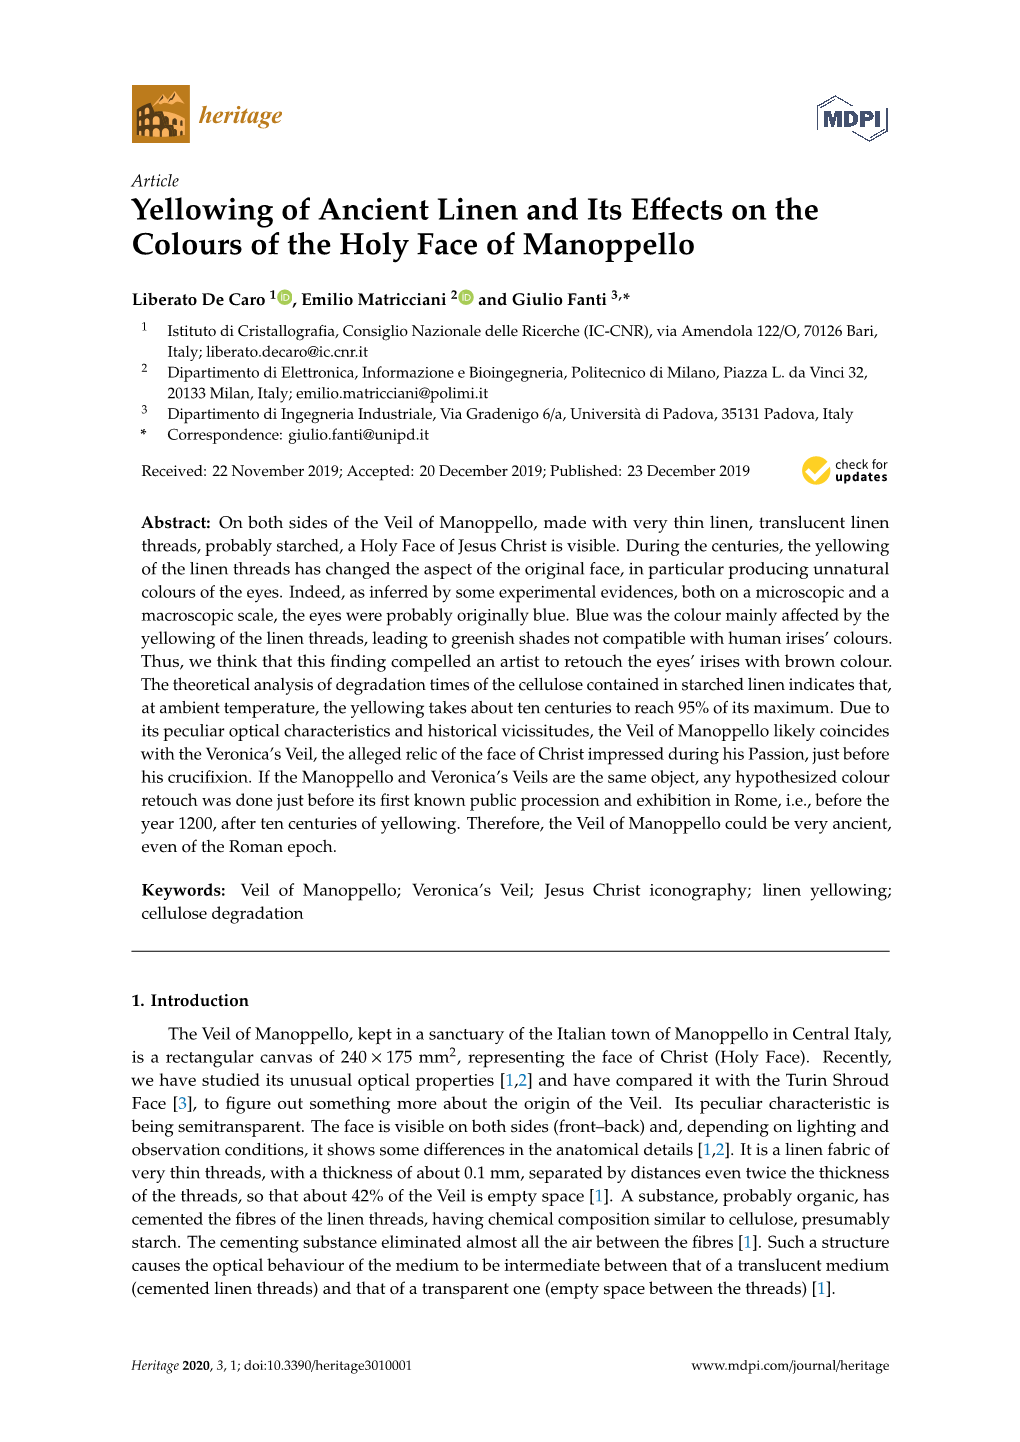 Yellowing of Ancient Linen and Its Effects on the Colours of the Holy Face of Manoppello